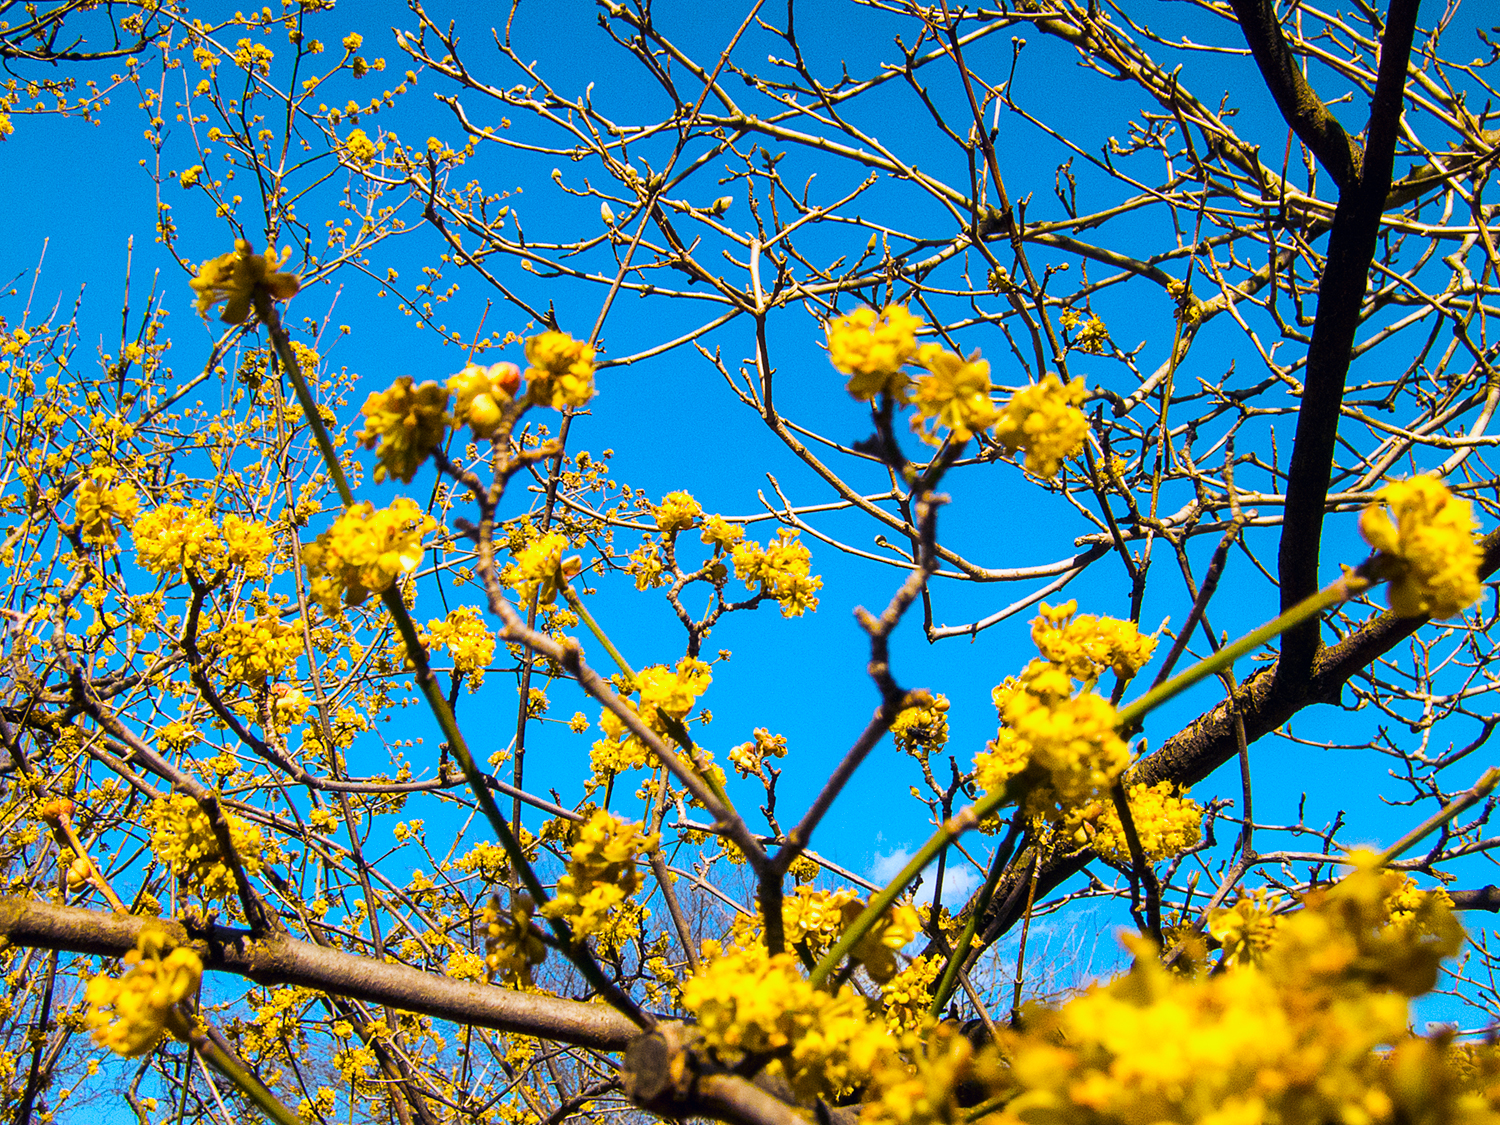 Path up a Tree Branch with Yellow Flowers